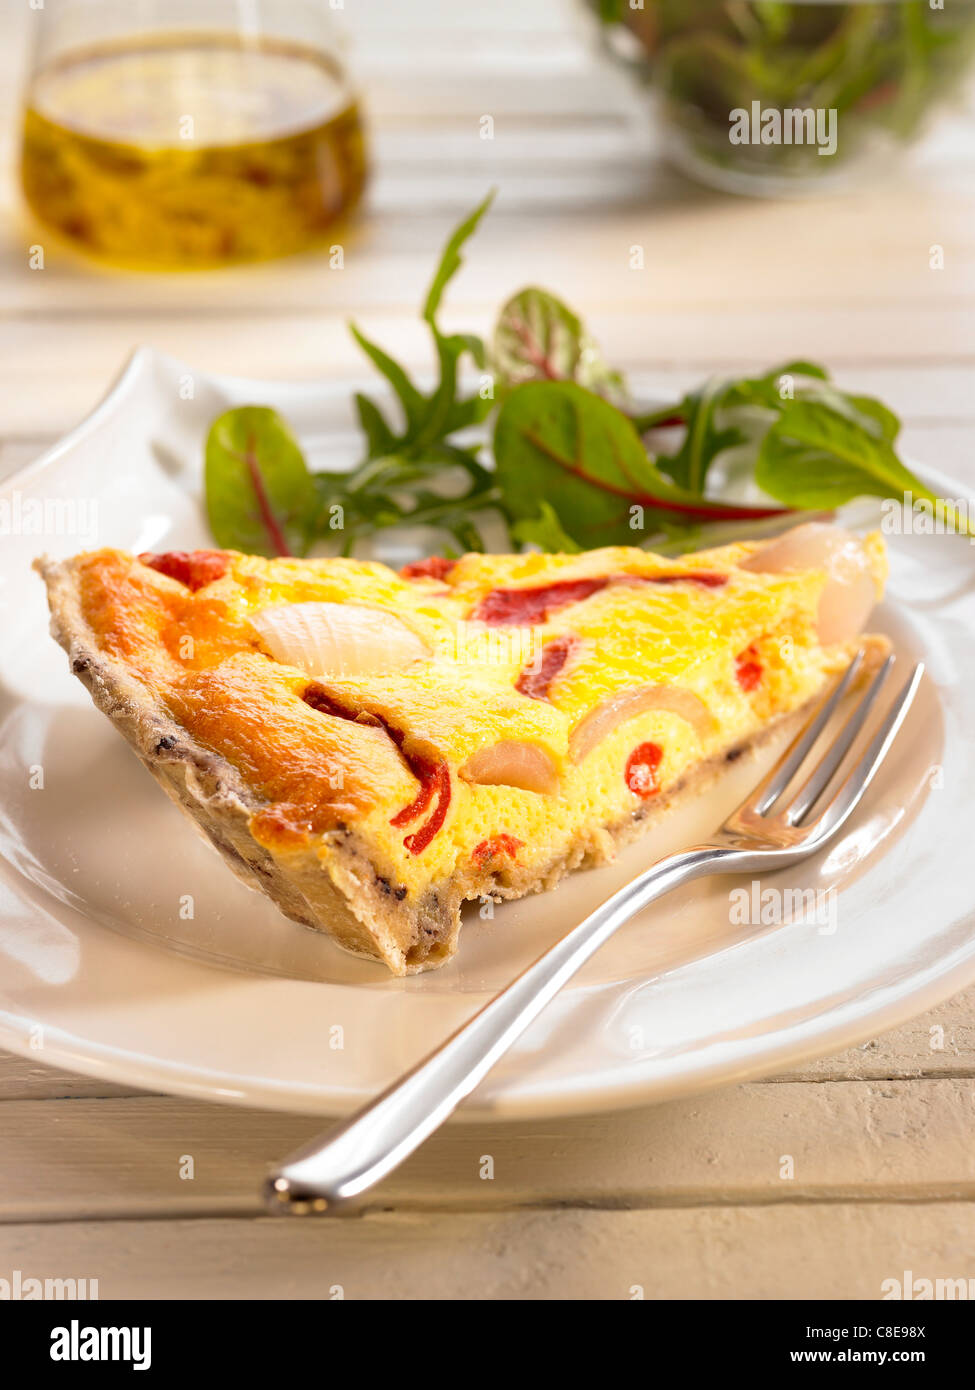 Pepper,parmesan and anchovy oil quiche Stock Photo